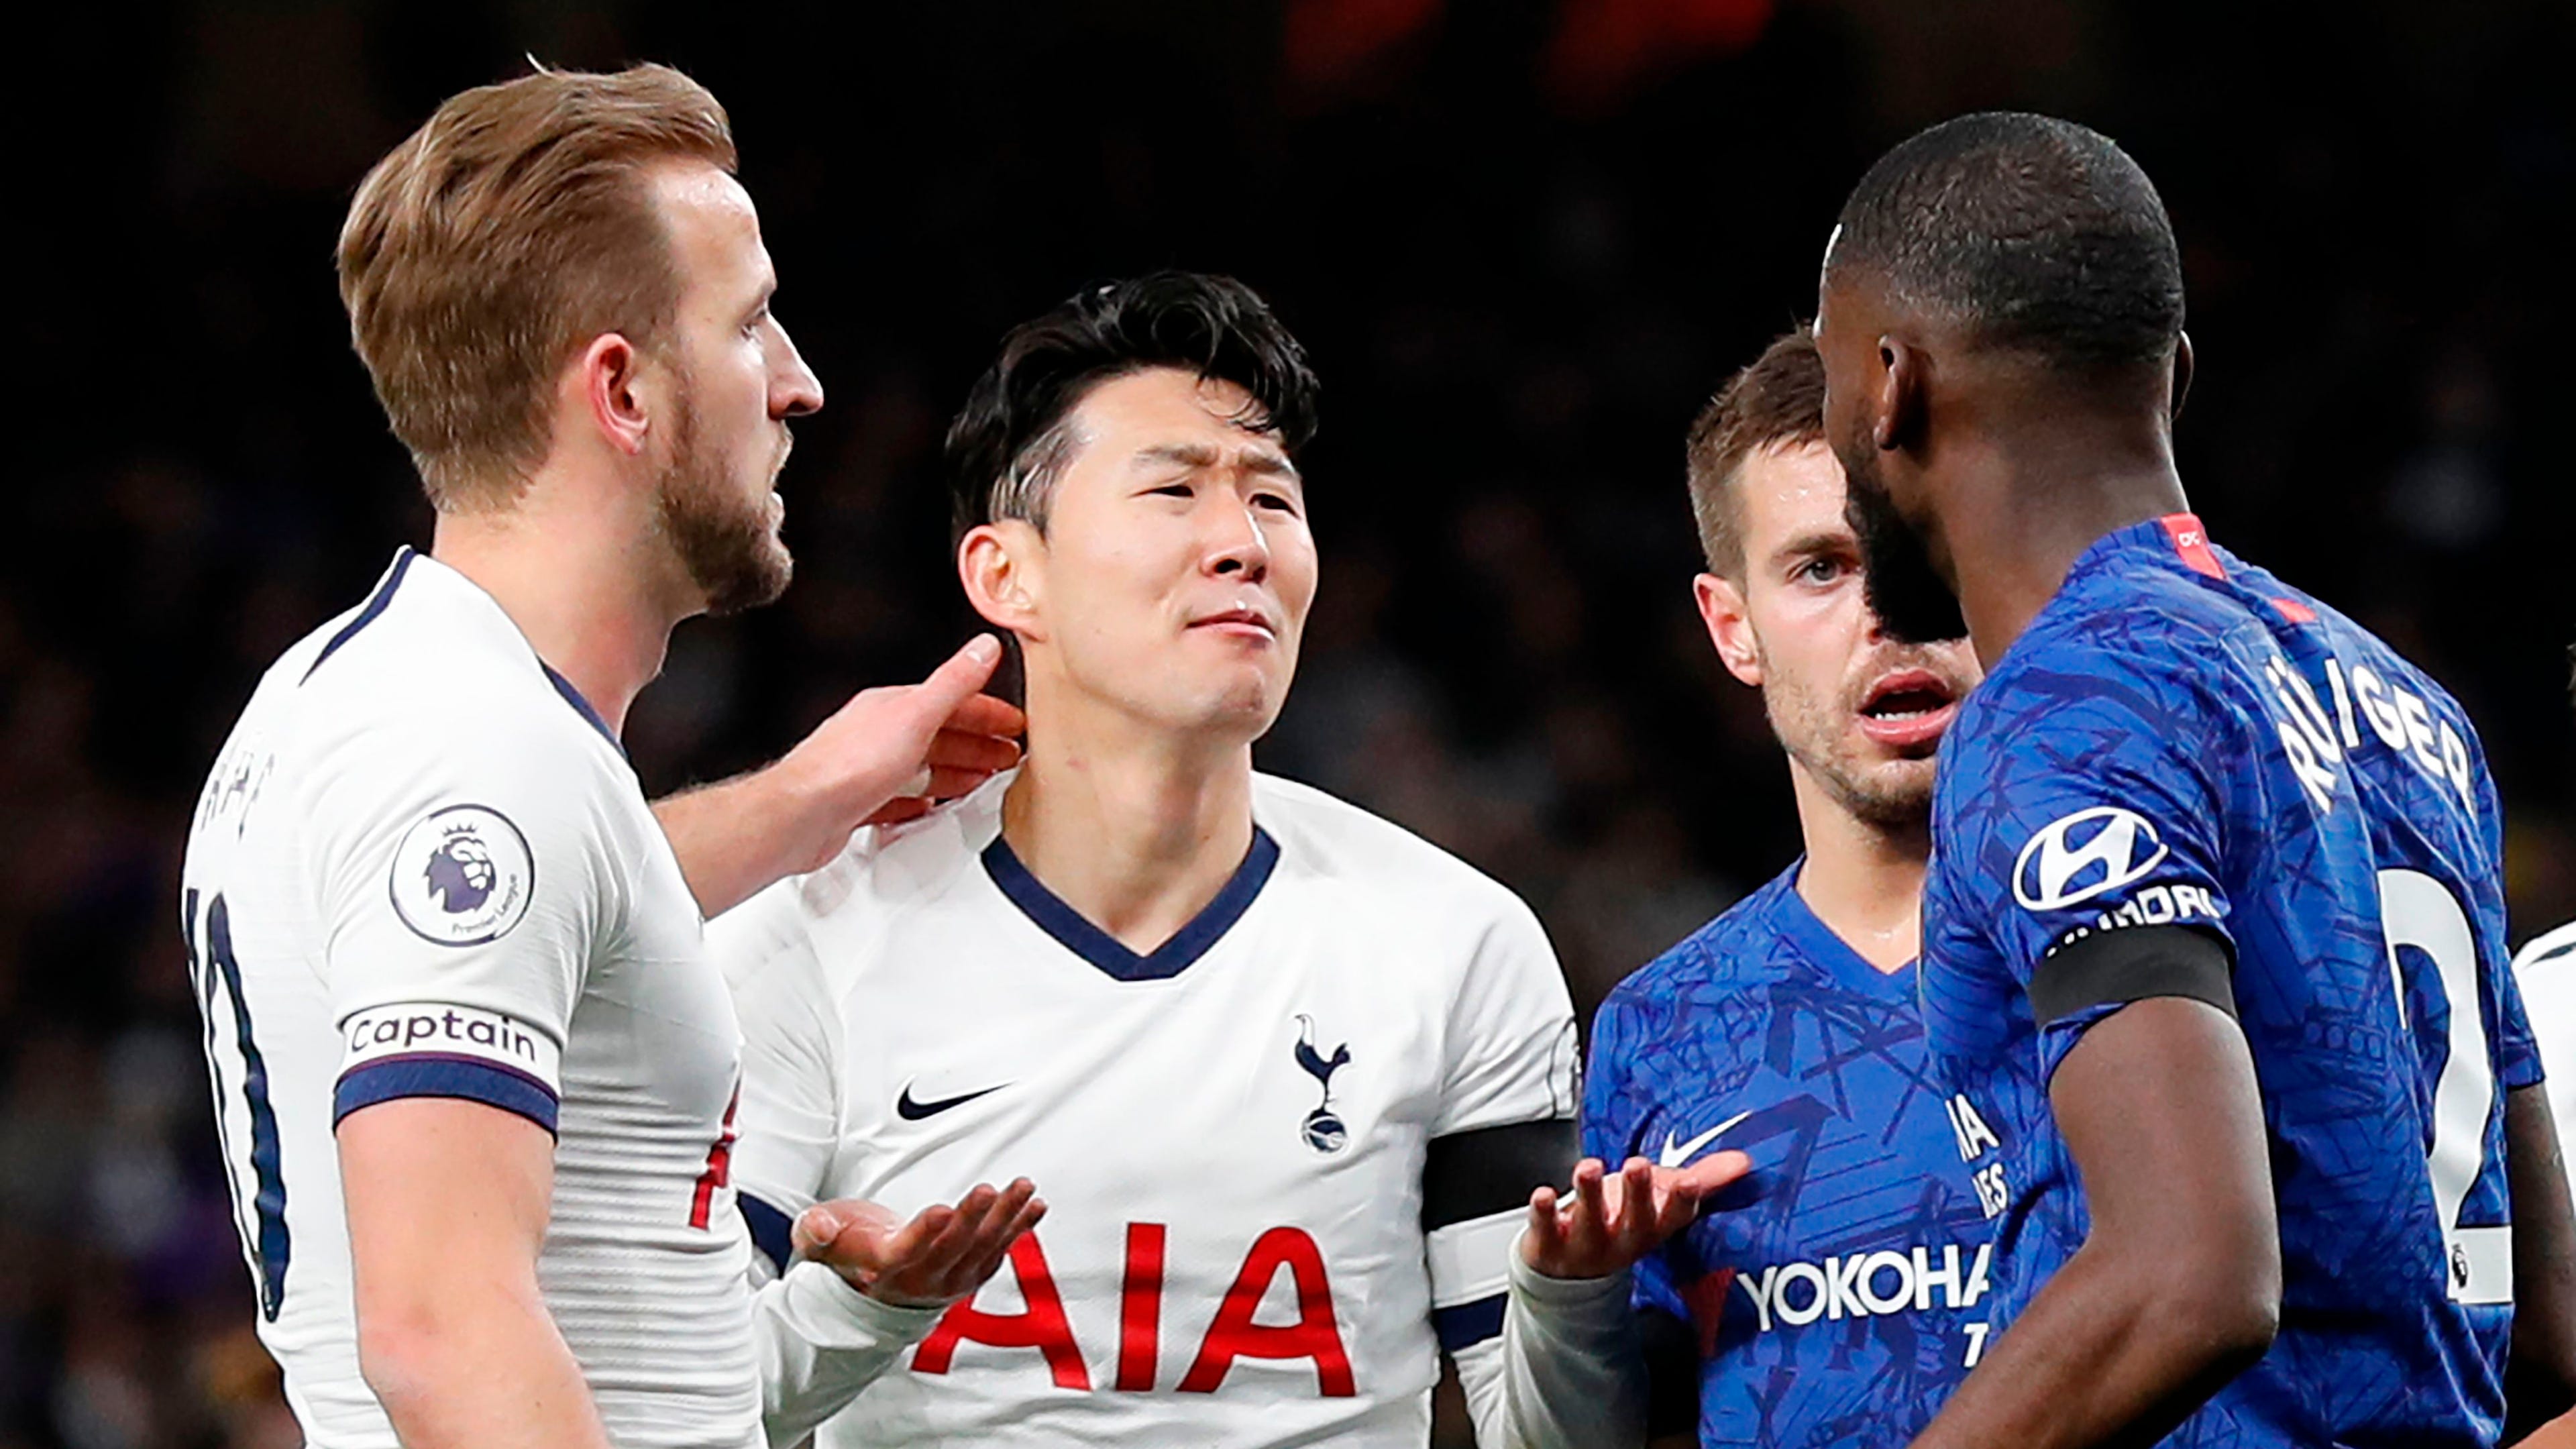 Focus should be on Rudiger, not Son' - Mourinho Chelsea for role in red card | Goal.com US